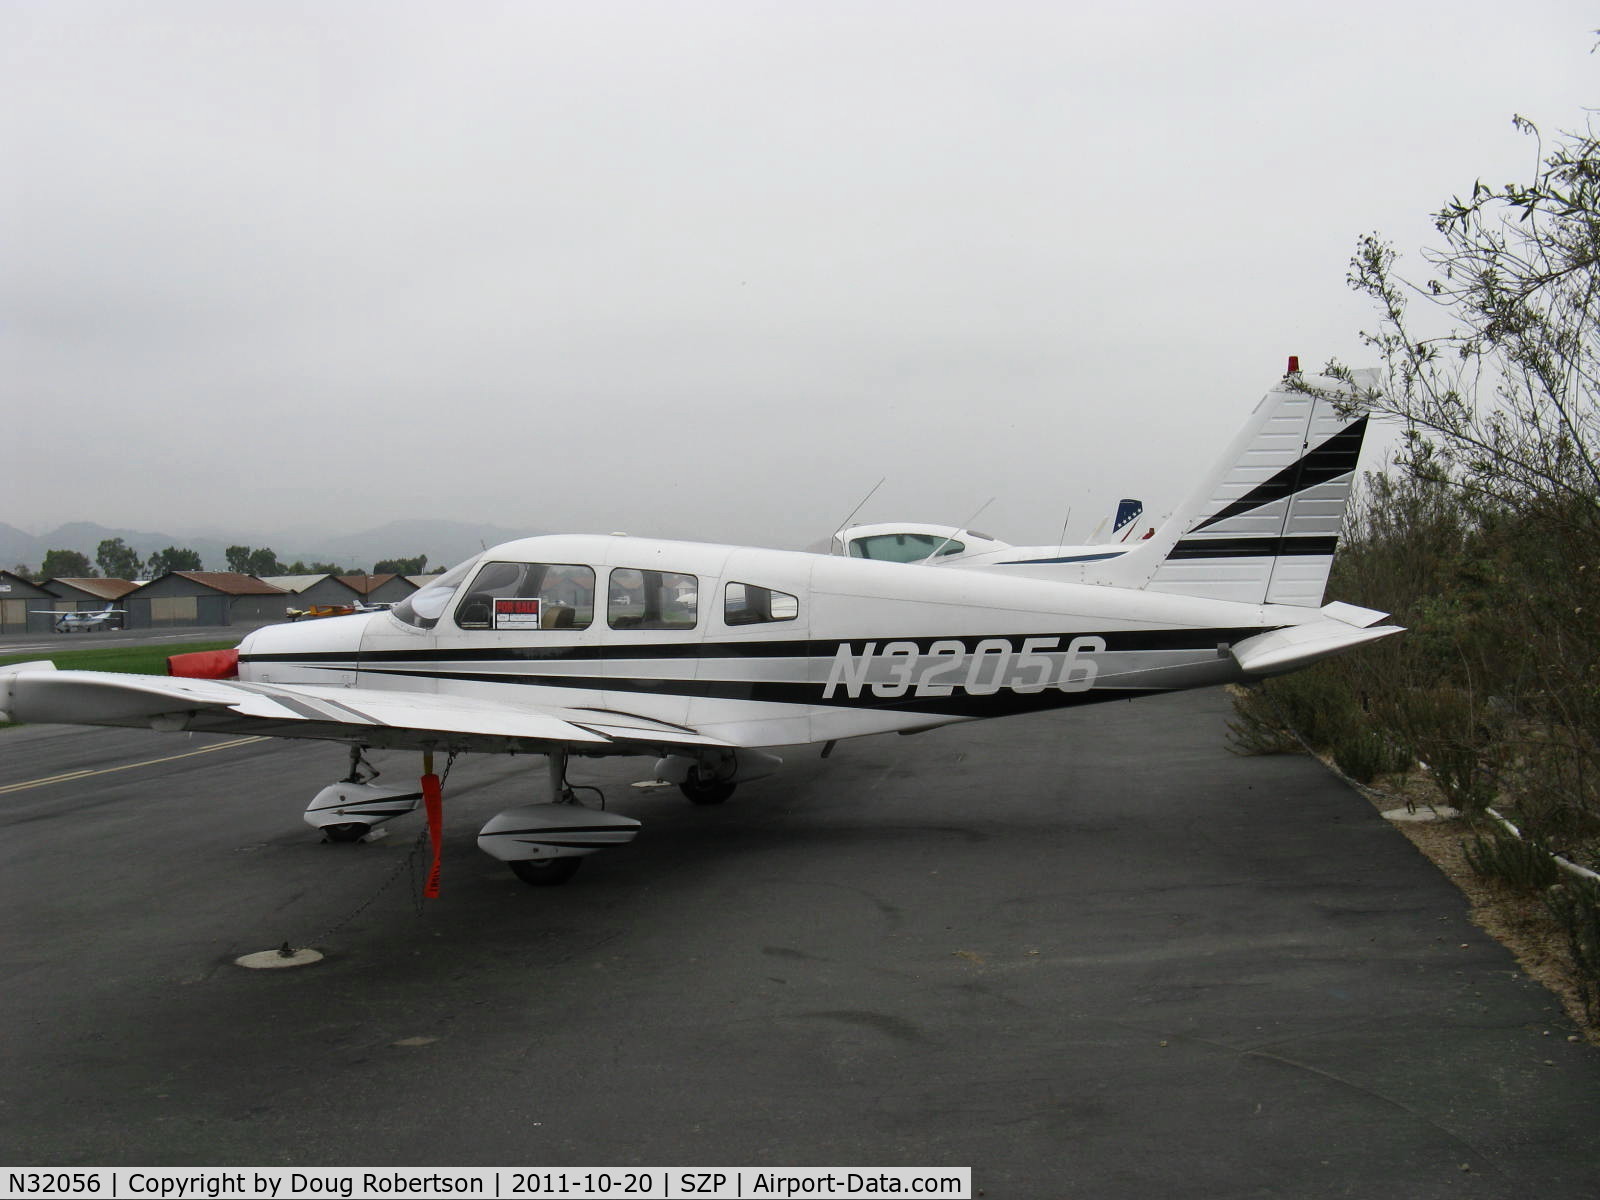 N32056, 1974 Piper PA-28-151 Cherokee Warrior C/N 28-7515056, 1975 Piper PA-28-151 WARRIOR, Lycoming O-320-E3D 150 Hp, FOR SALE-Herm needs to reduce the size of his Air Force.